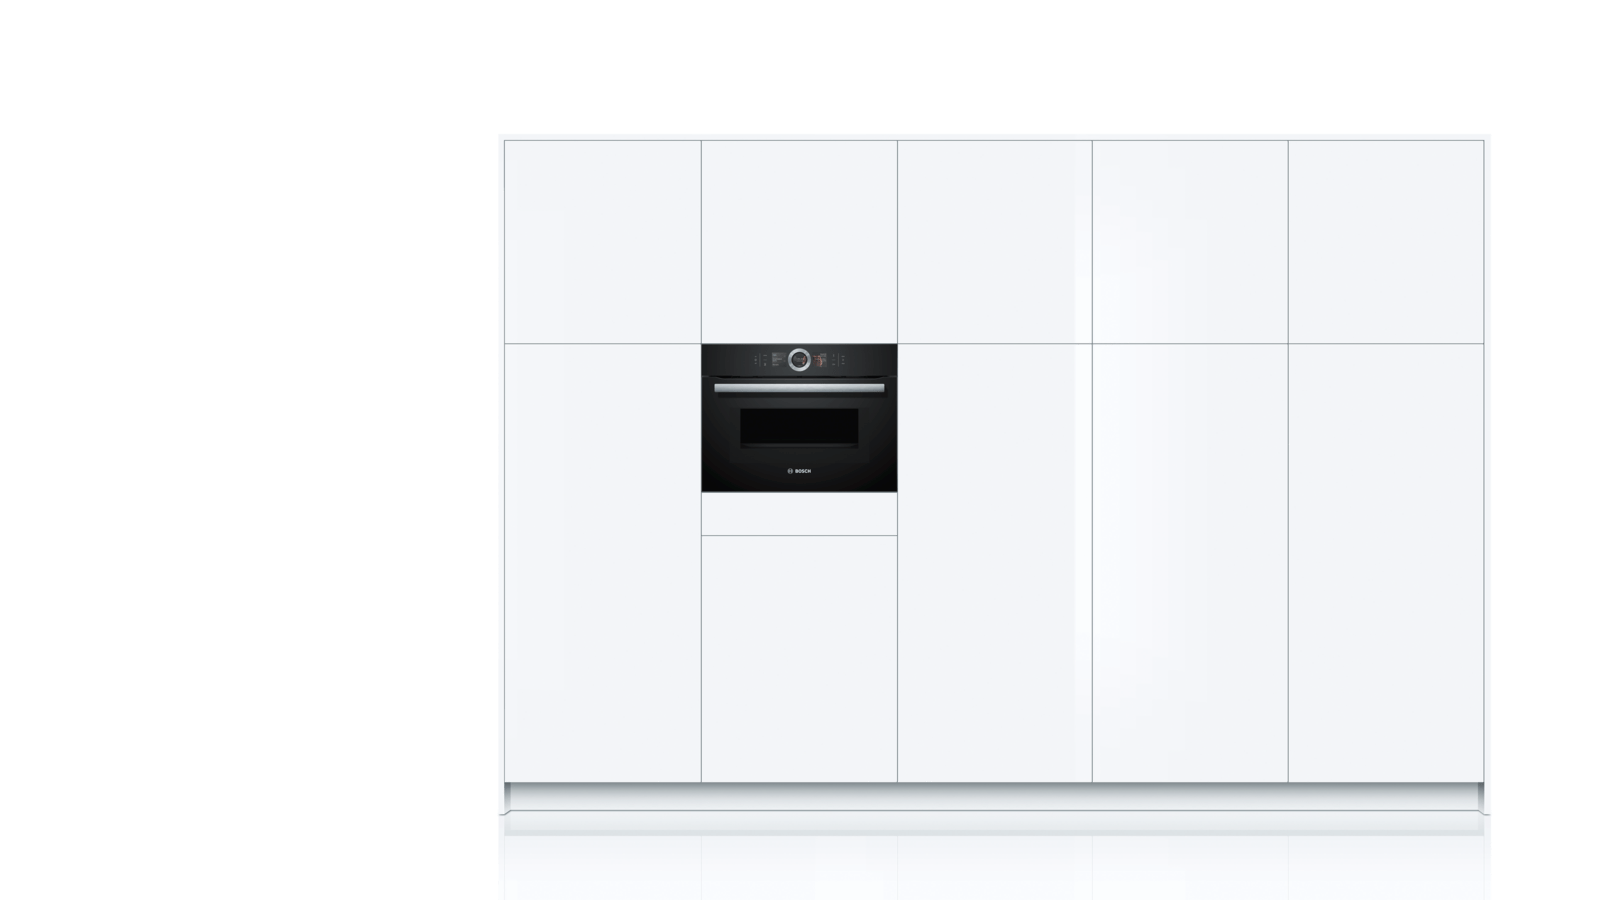 Bosch Serie 8 Oven with Microwave CMG676BB1